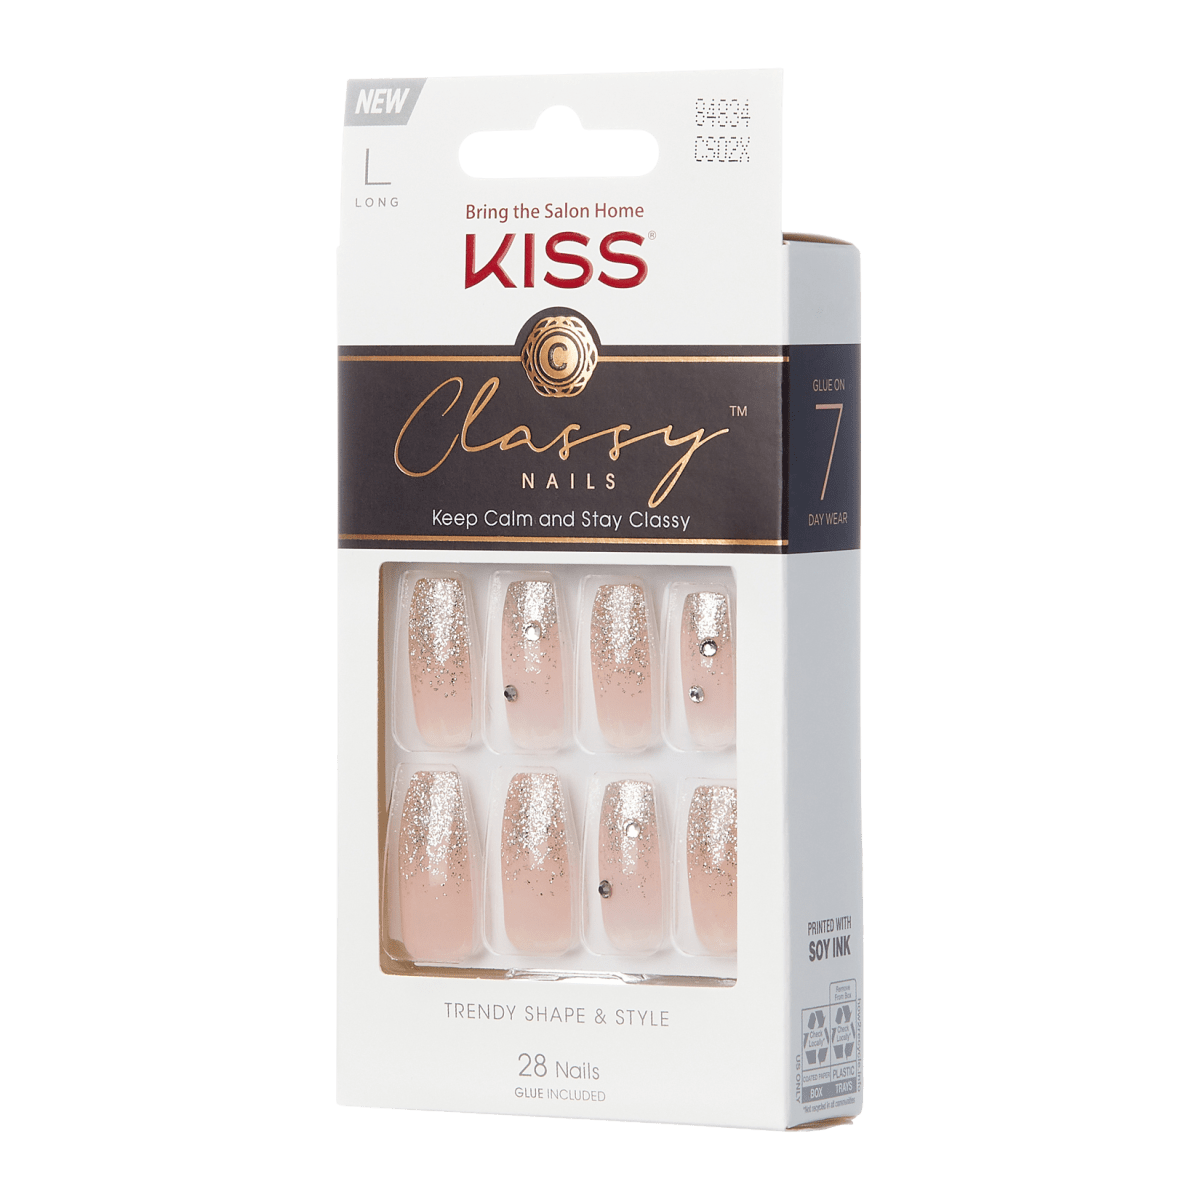 KISS Classy Nails, Press-On Nails, My View, Pink, Long Coffin, 28ct